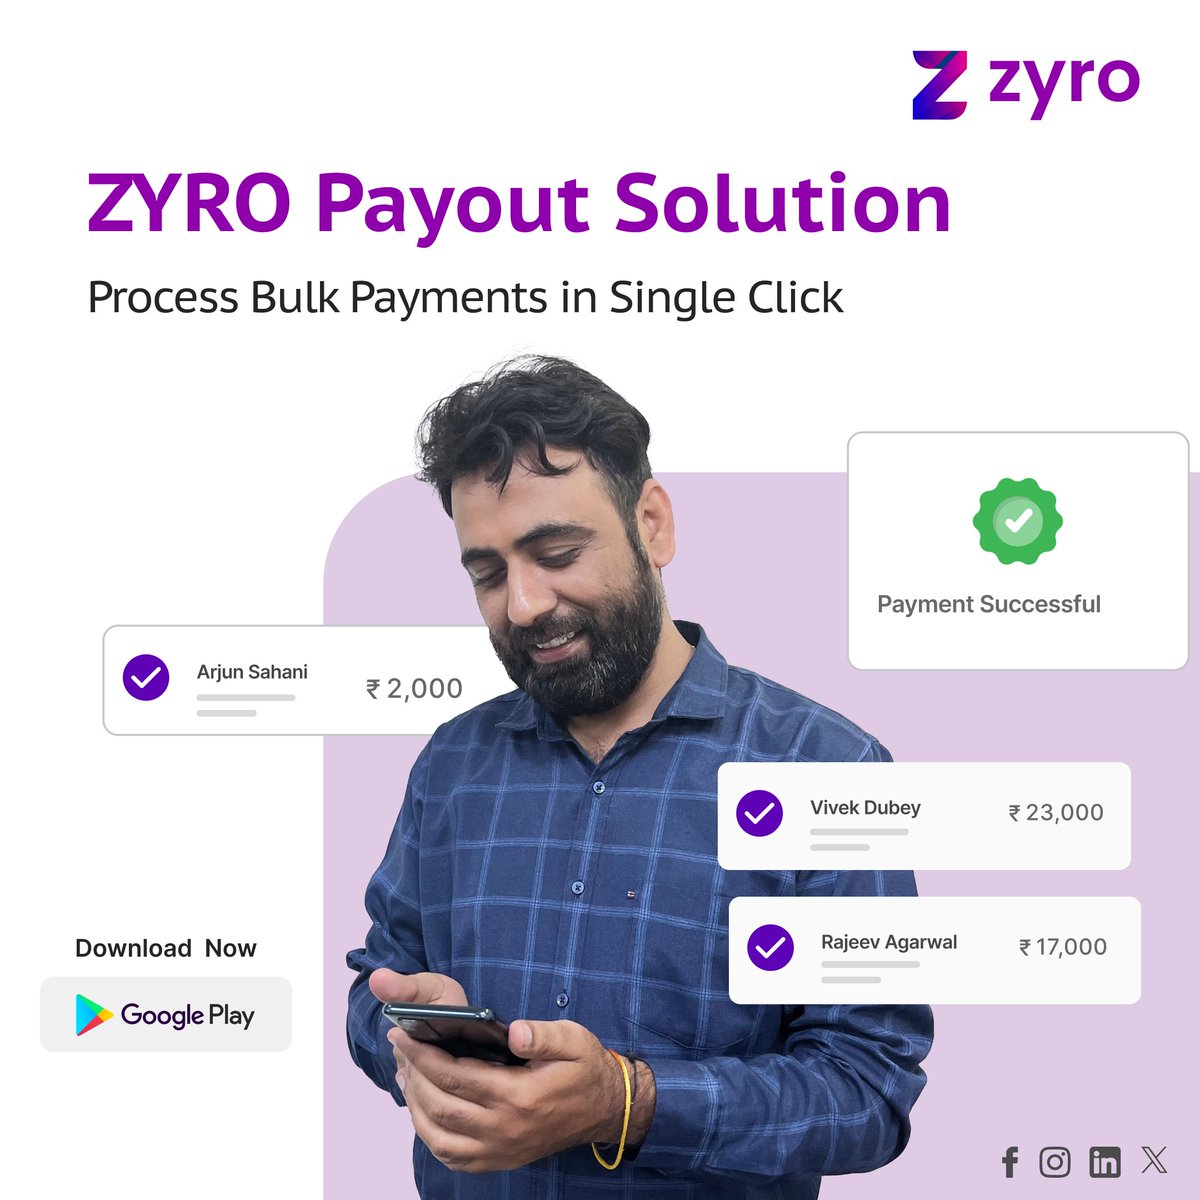 Process multiple payments in seconds with a single click. Say goodbye to manual work! Experience the ease and efficiency of managing bulk payments. 

#ZyroPayout #EfficientPayments #BulkTransfers #Fintech #ZyroBulkPayout #FinancialOperations #Zyro #BulkMoneyTransfer